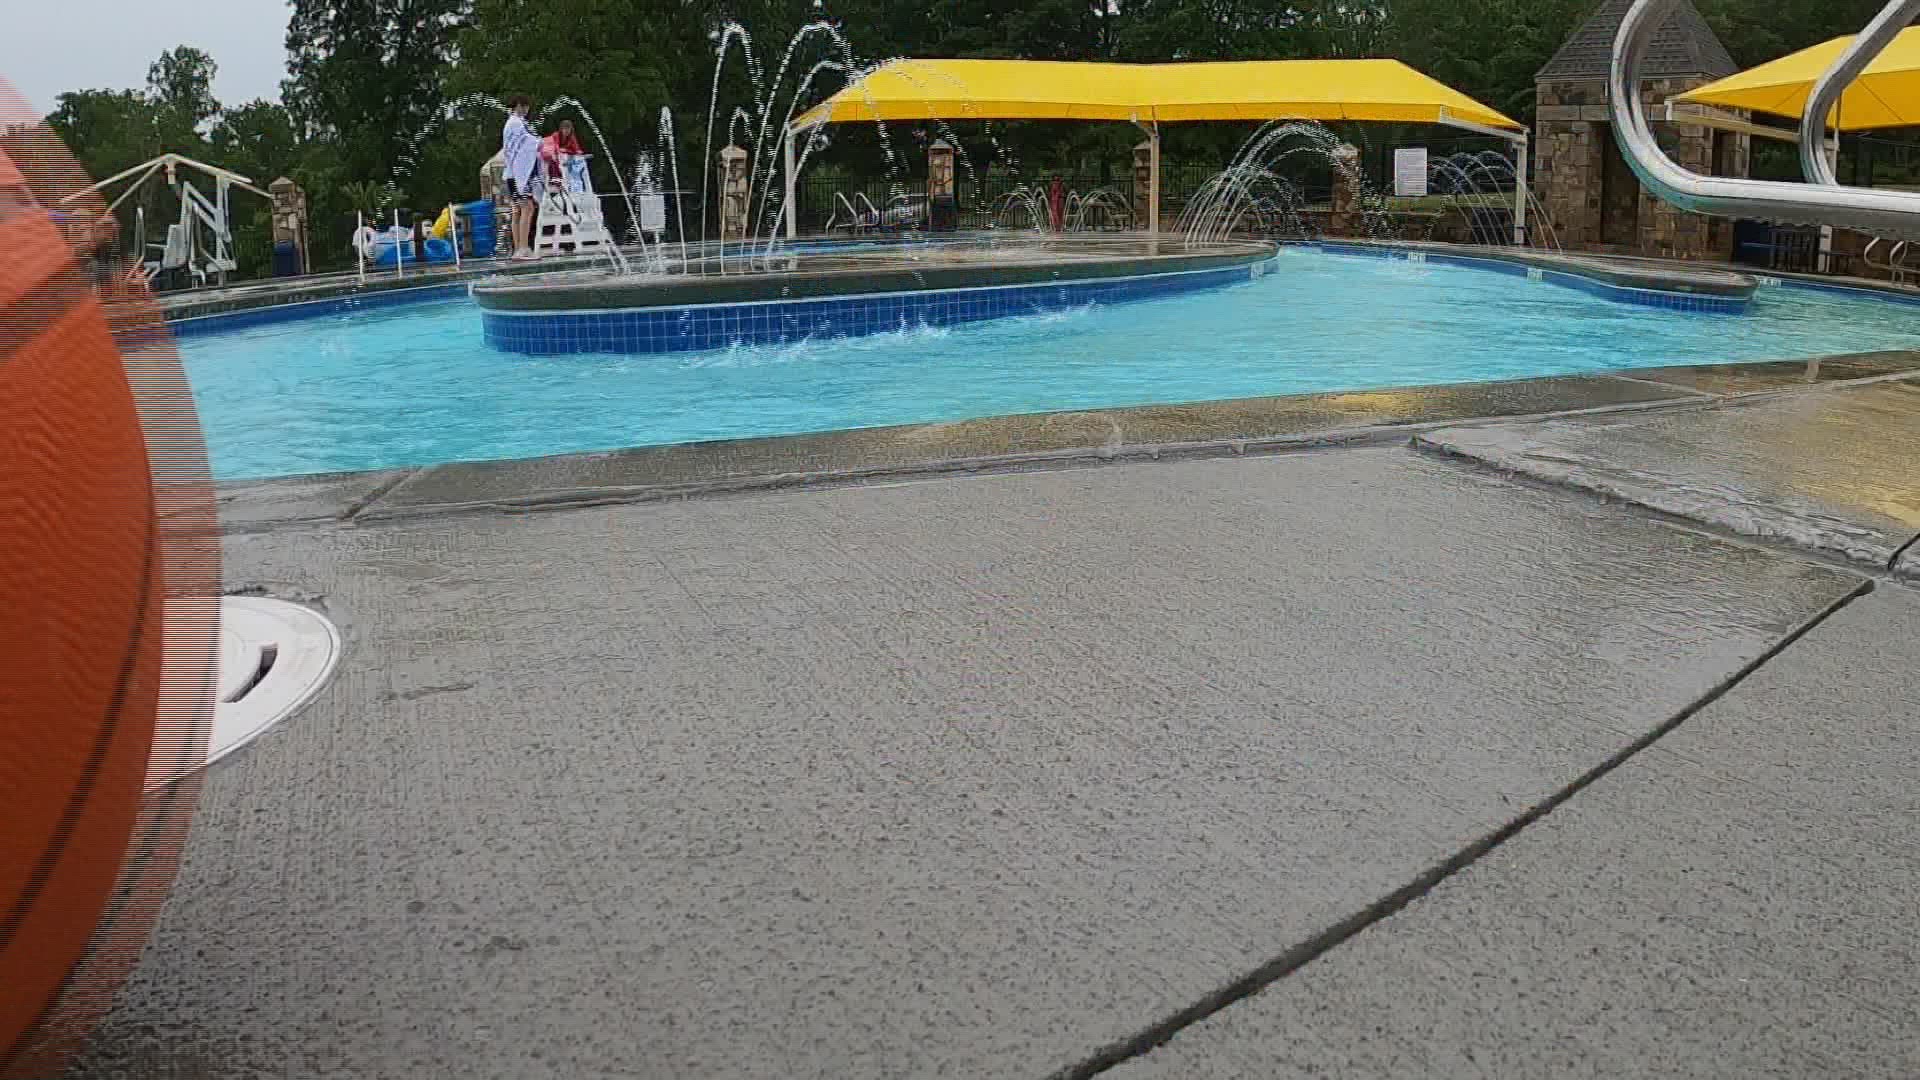 Pools would typically be busy on Memorial Day weekend but are all but deserted thanks to the cold, rainy weather.